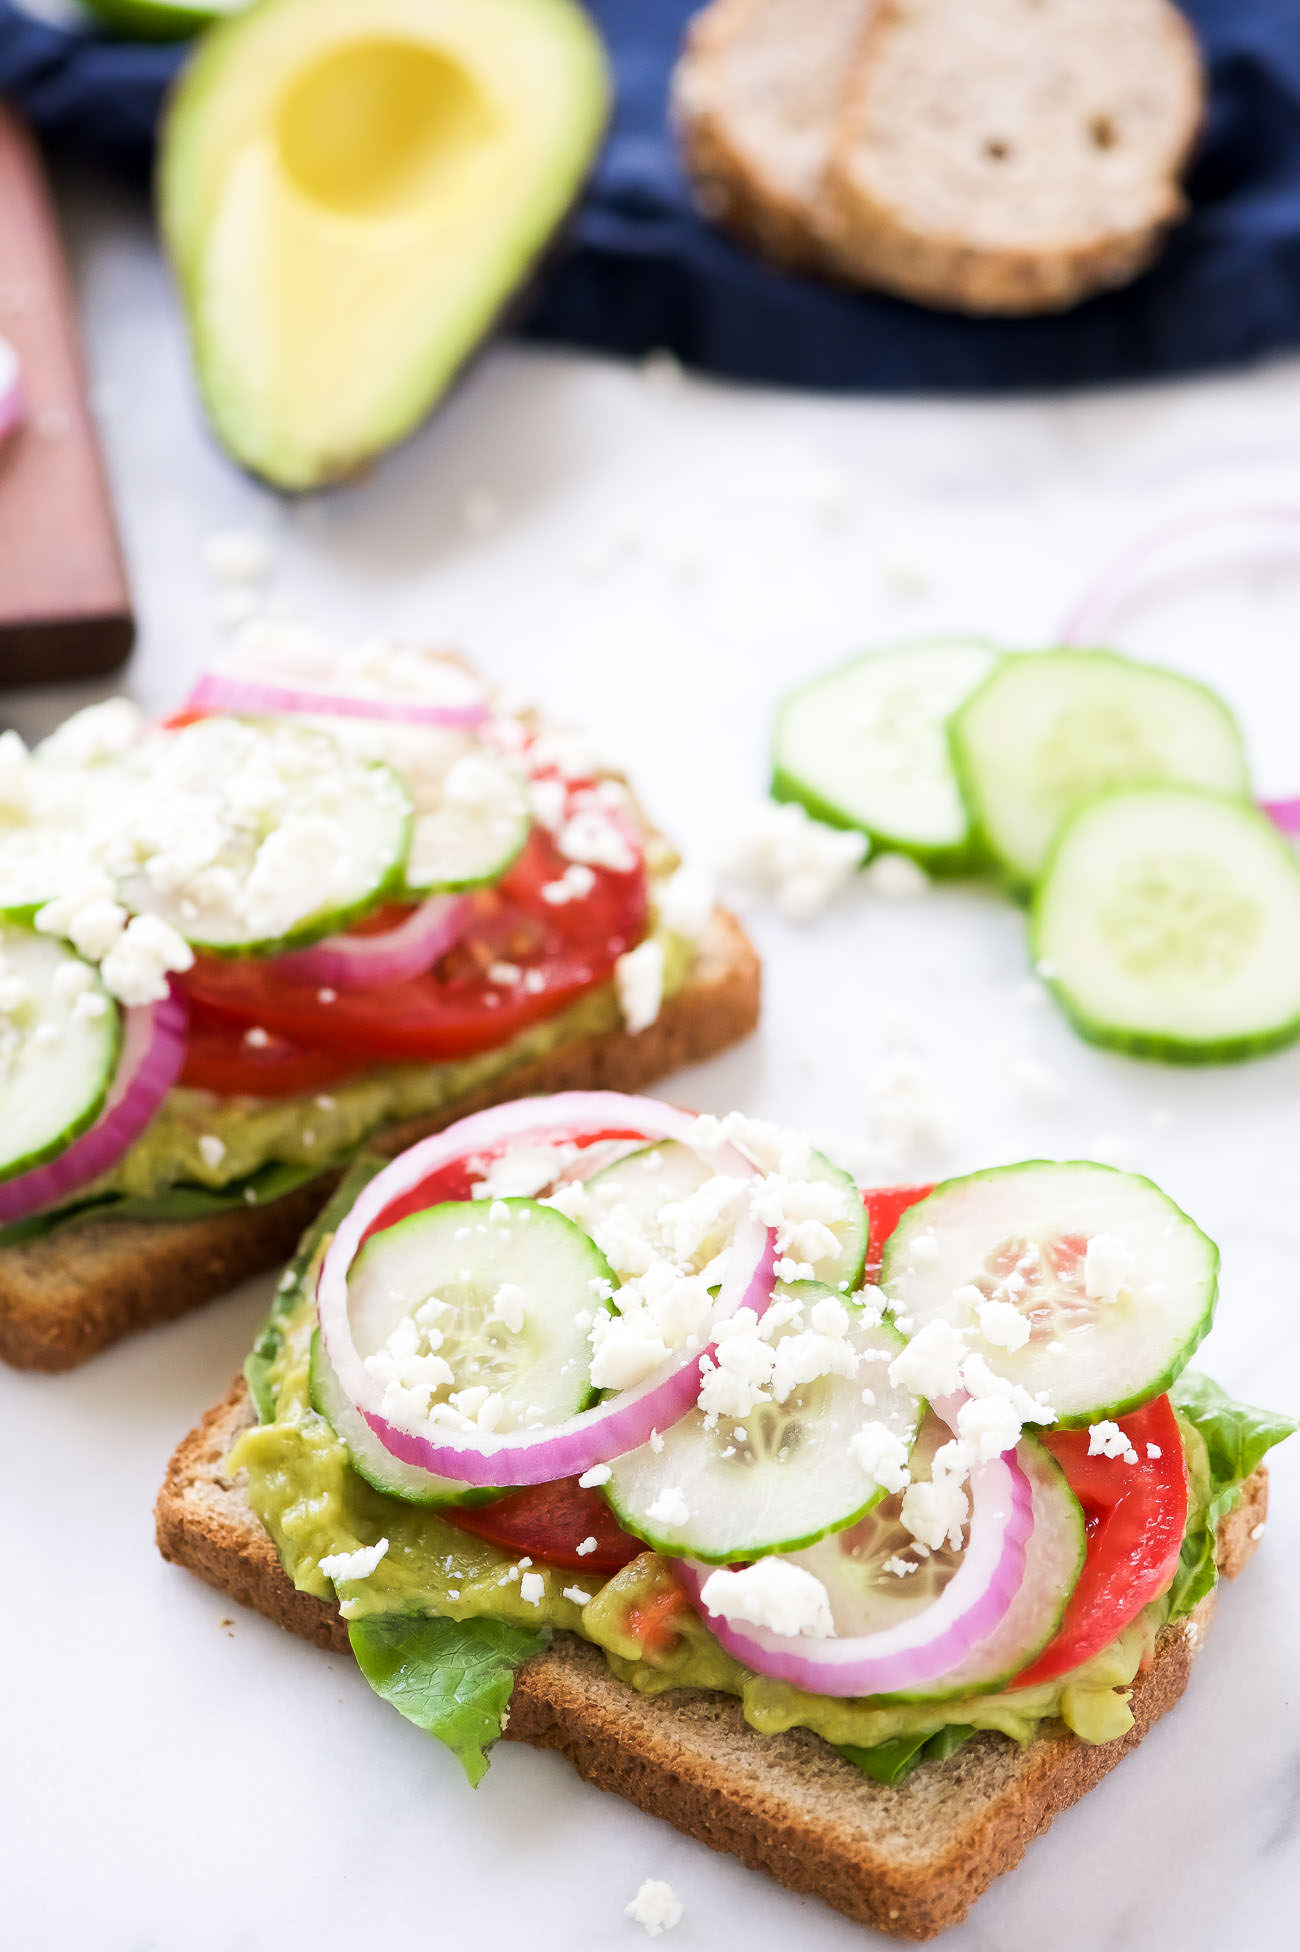 Mediterranean Avocado Toast is a spin off of my favorite veggie filled sandwich from Panera that satisfies both vegetarians and meat-lovers! A super quick and fresh, colorful sandwich - garden veggie filled guacamole, crispy cucumbers, red onions, juicy tomatoes and salty feta! 